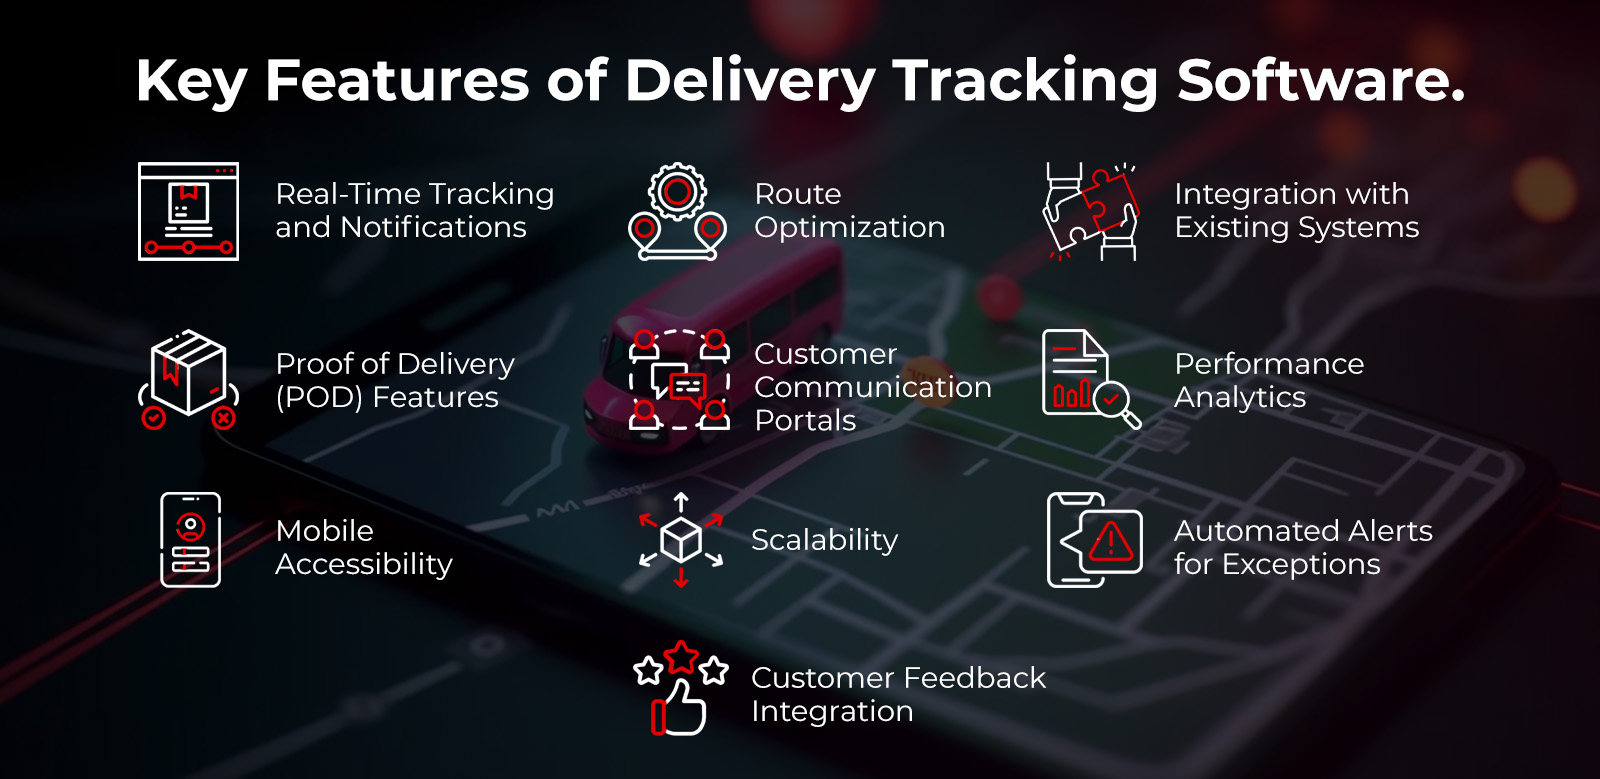 Key features of delivery tracking software